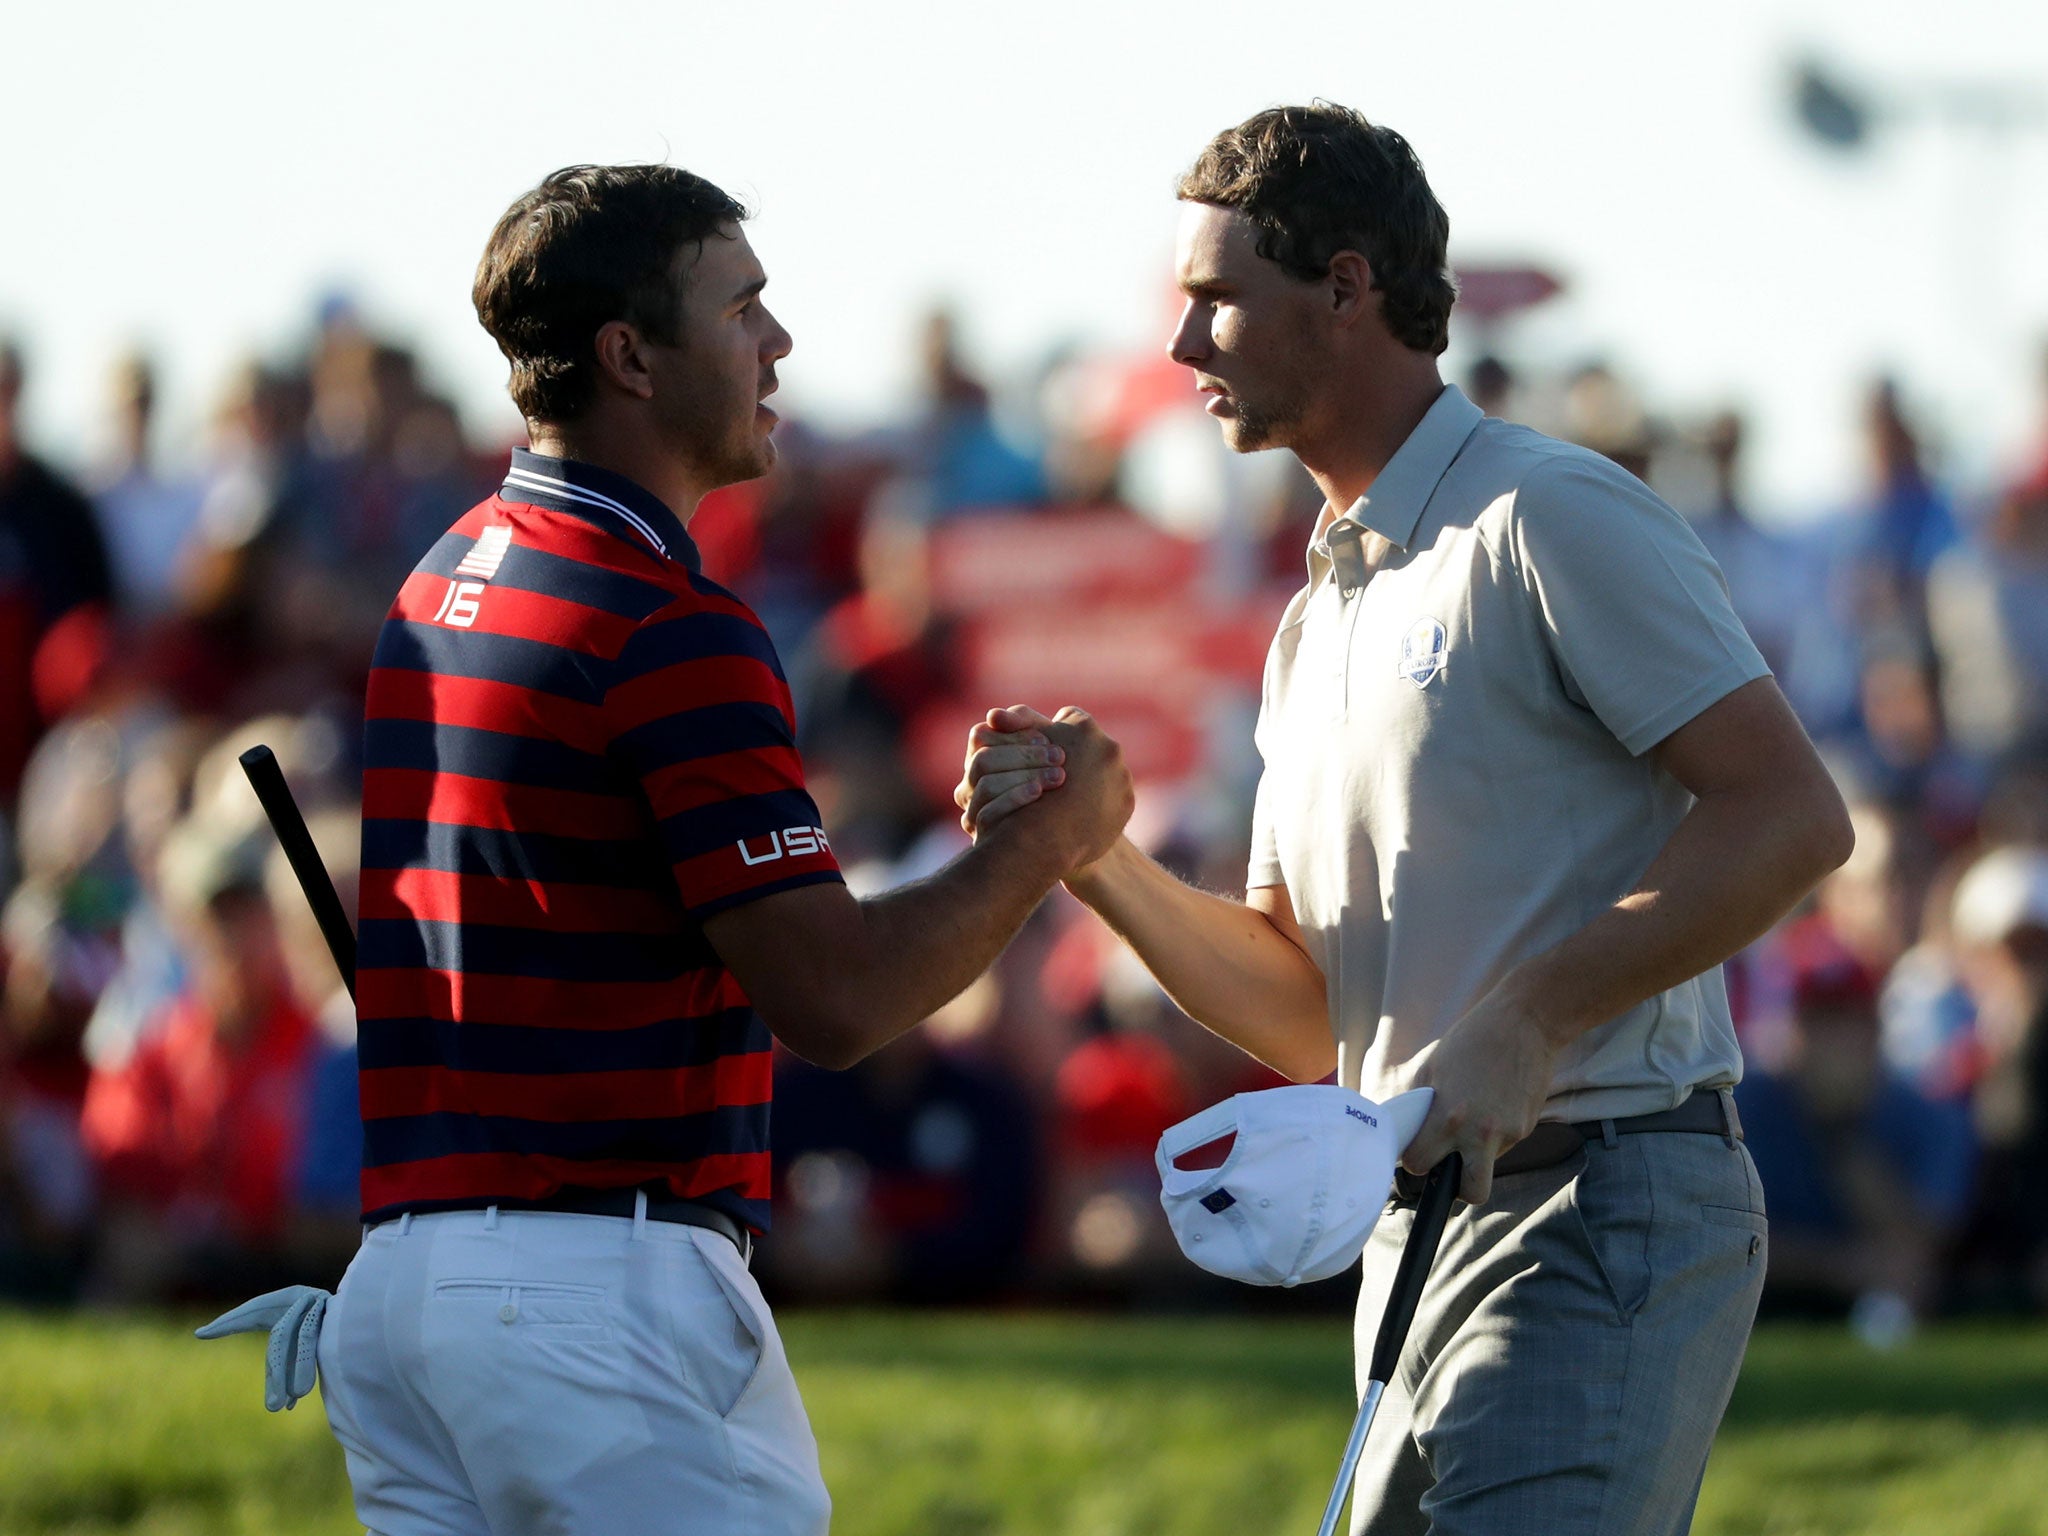 The Ryder Cup reaches its exciting conclusion later tonight - but who will emerge victorious?